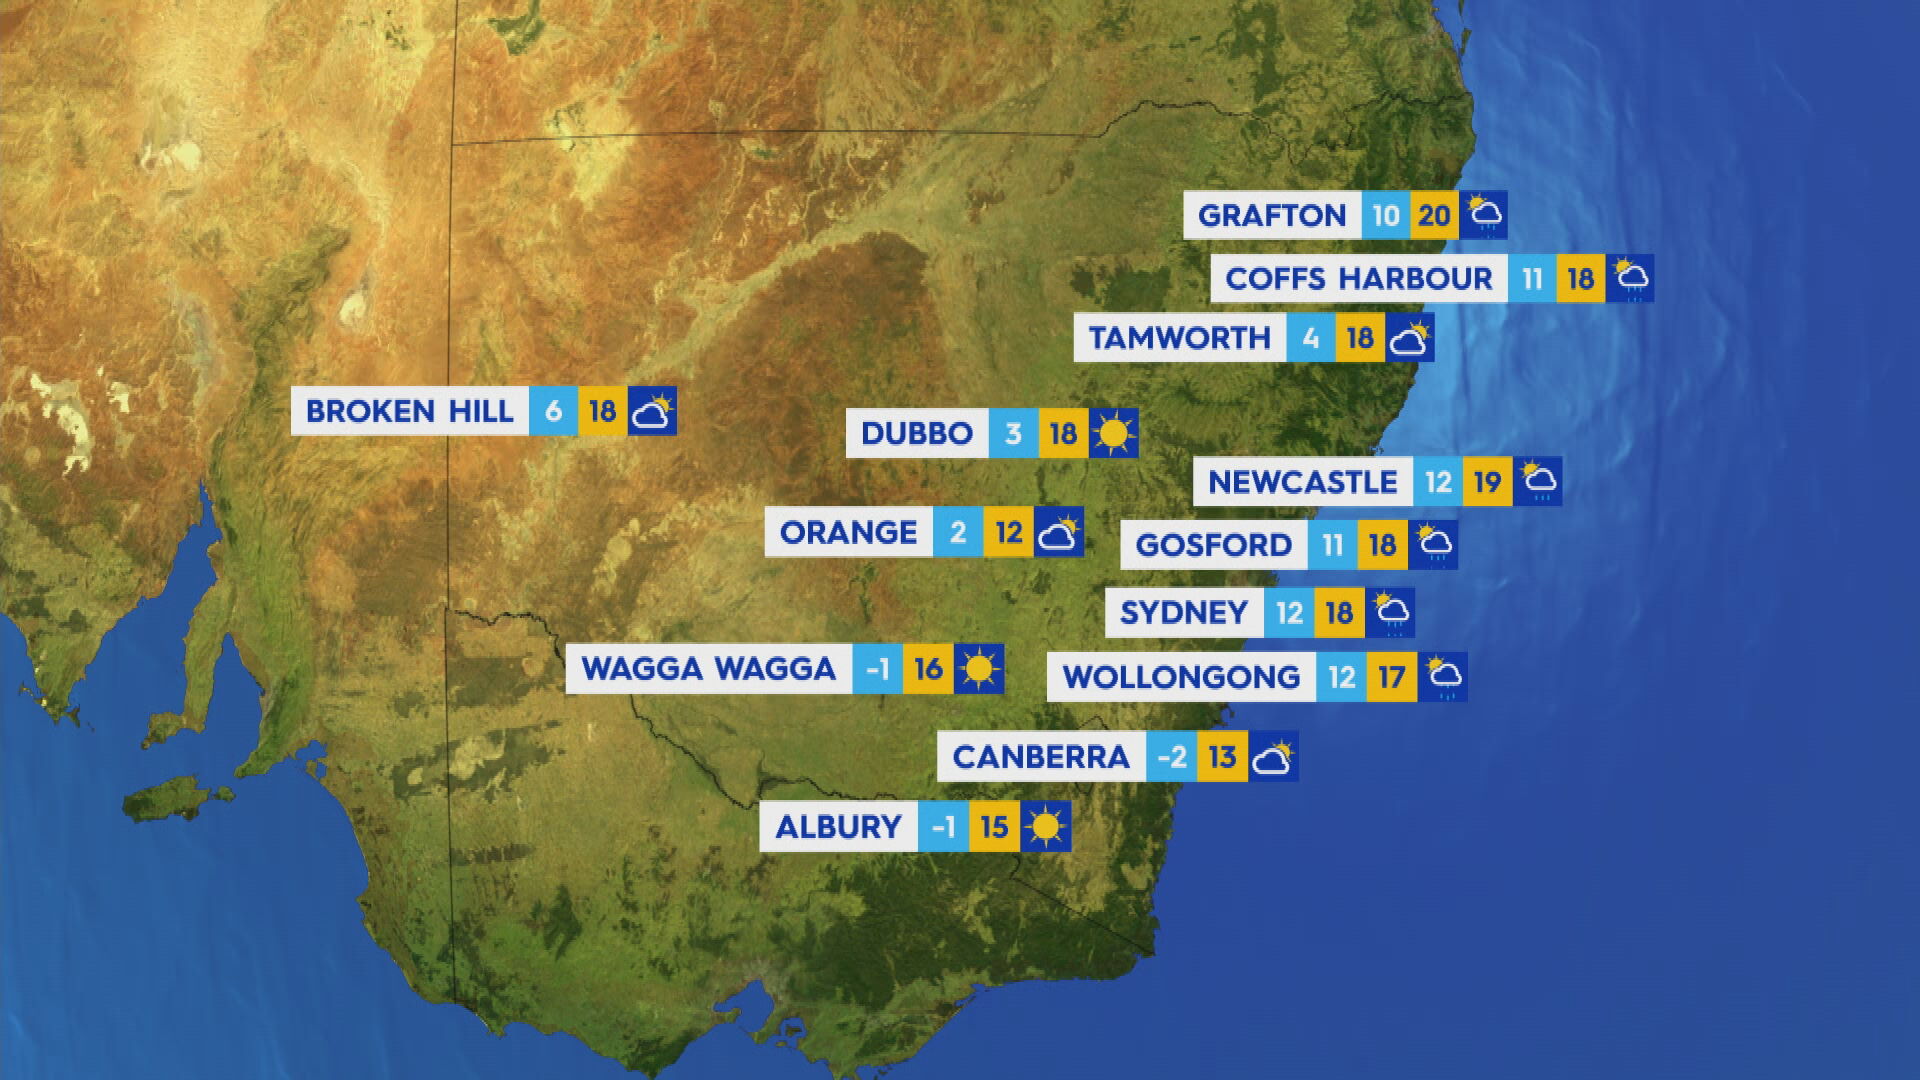 National weather forecast for Saturday July 6